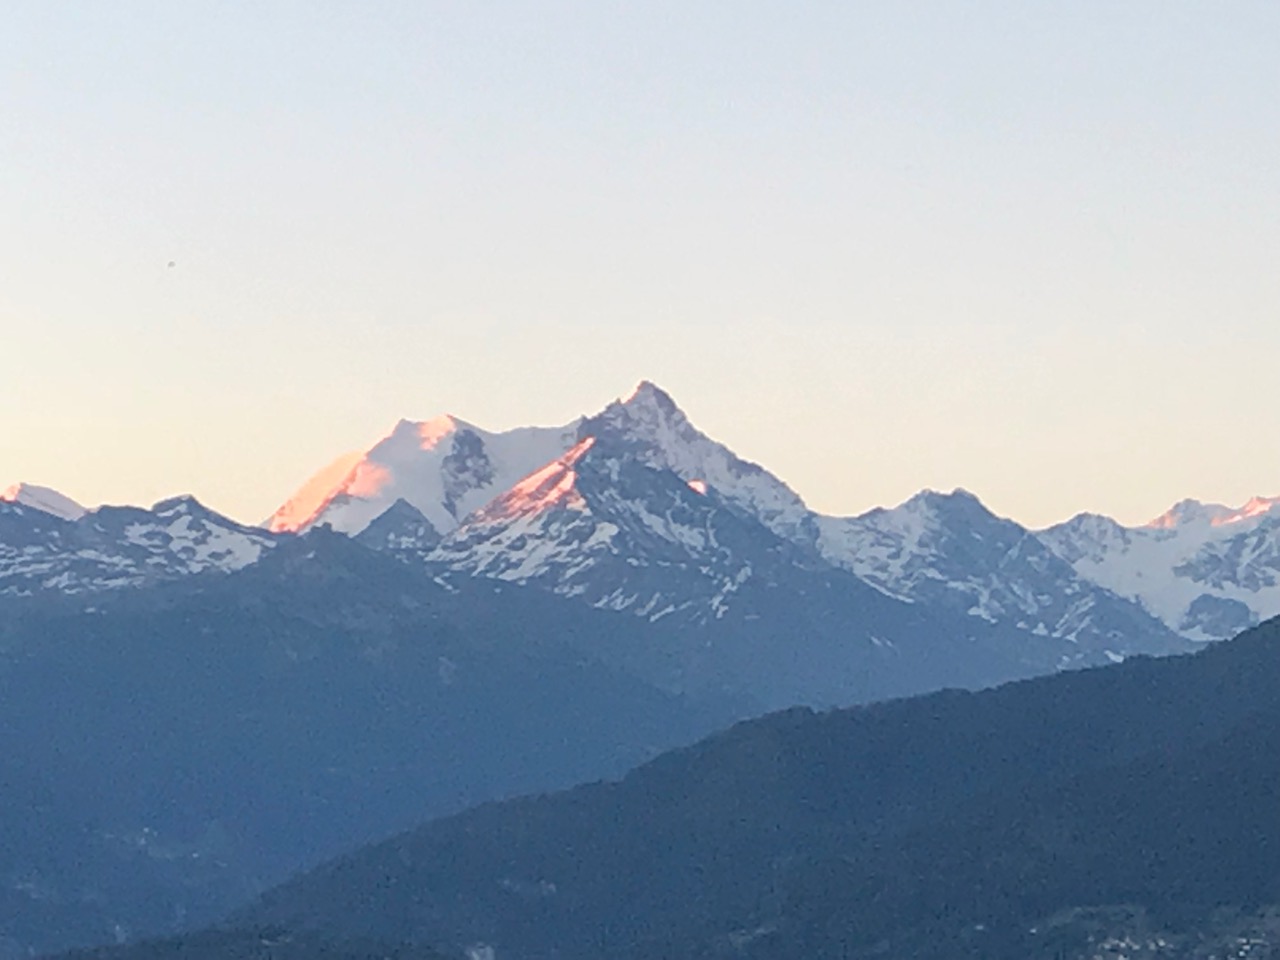 The alpenglow in Crans-Montana- view from the Elite Hotel. Photo by: The-Ski-Guru.